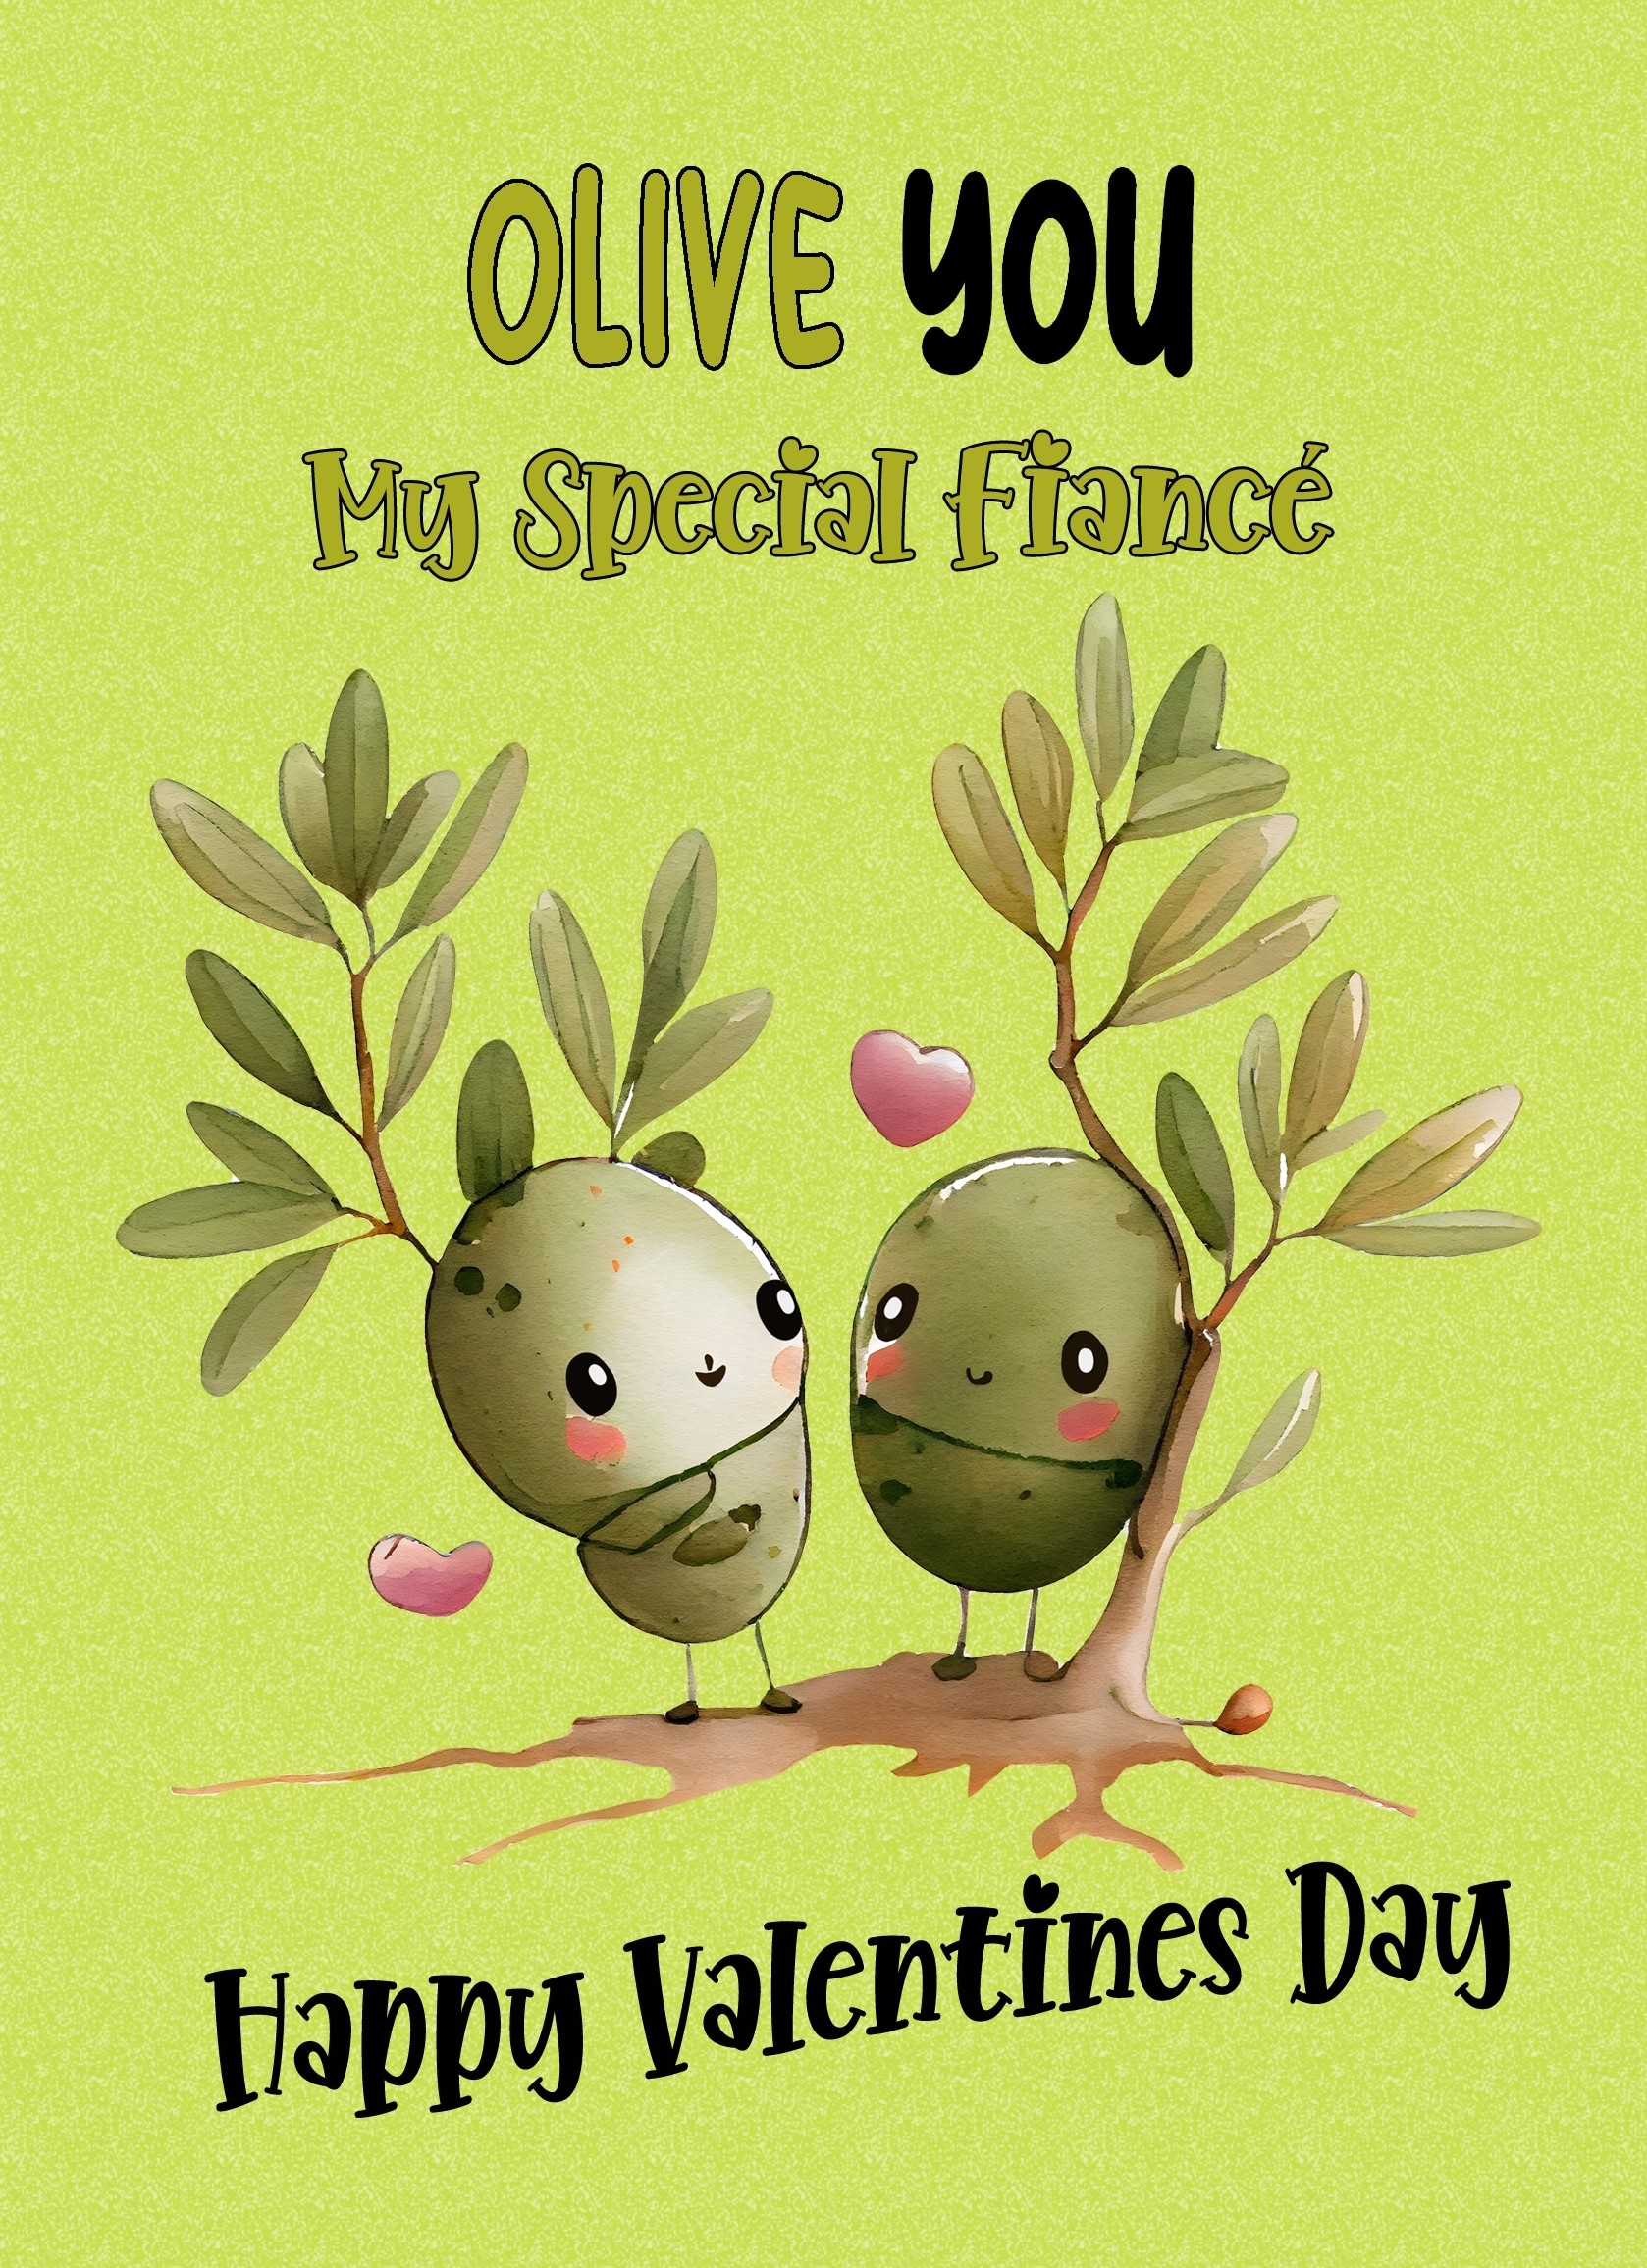 Funny Pun Valentines Day Card for Fiance (Olive You)